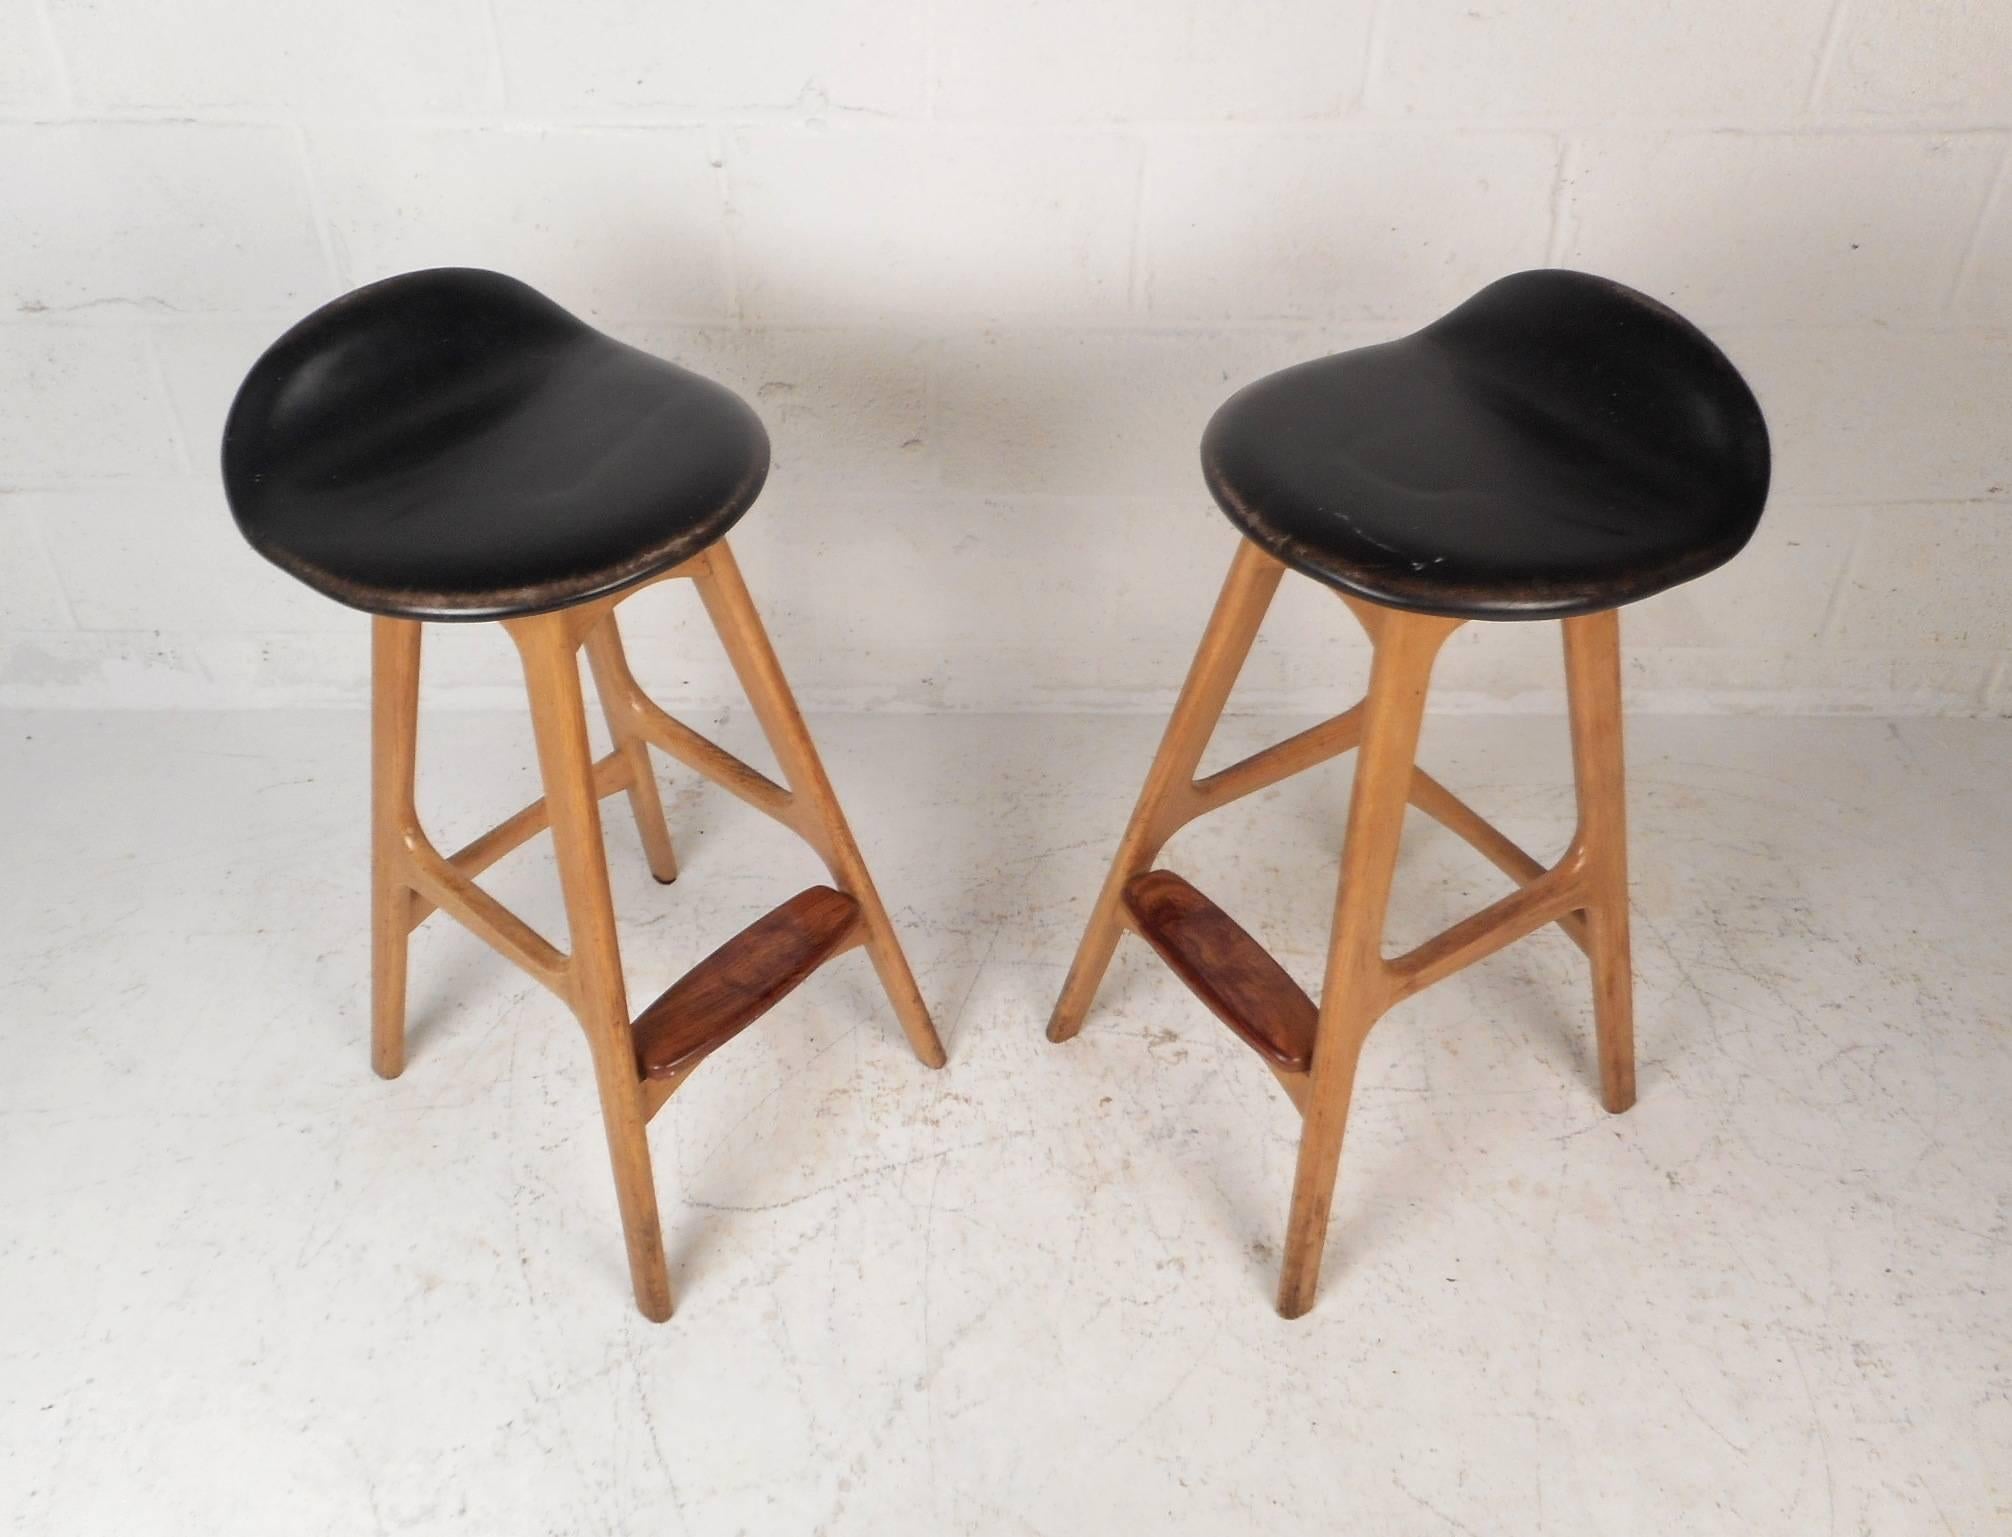 This beautiful pair of vintage modern bar stools feature leather seats and a solid teak frame. The unique sculpted seat has a raised back that functions as a partial backrest. Sleek design with angled legs, dove tail joints, and a conveniently